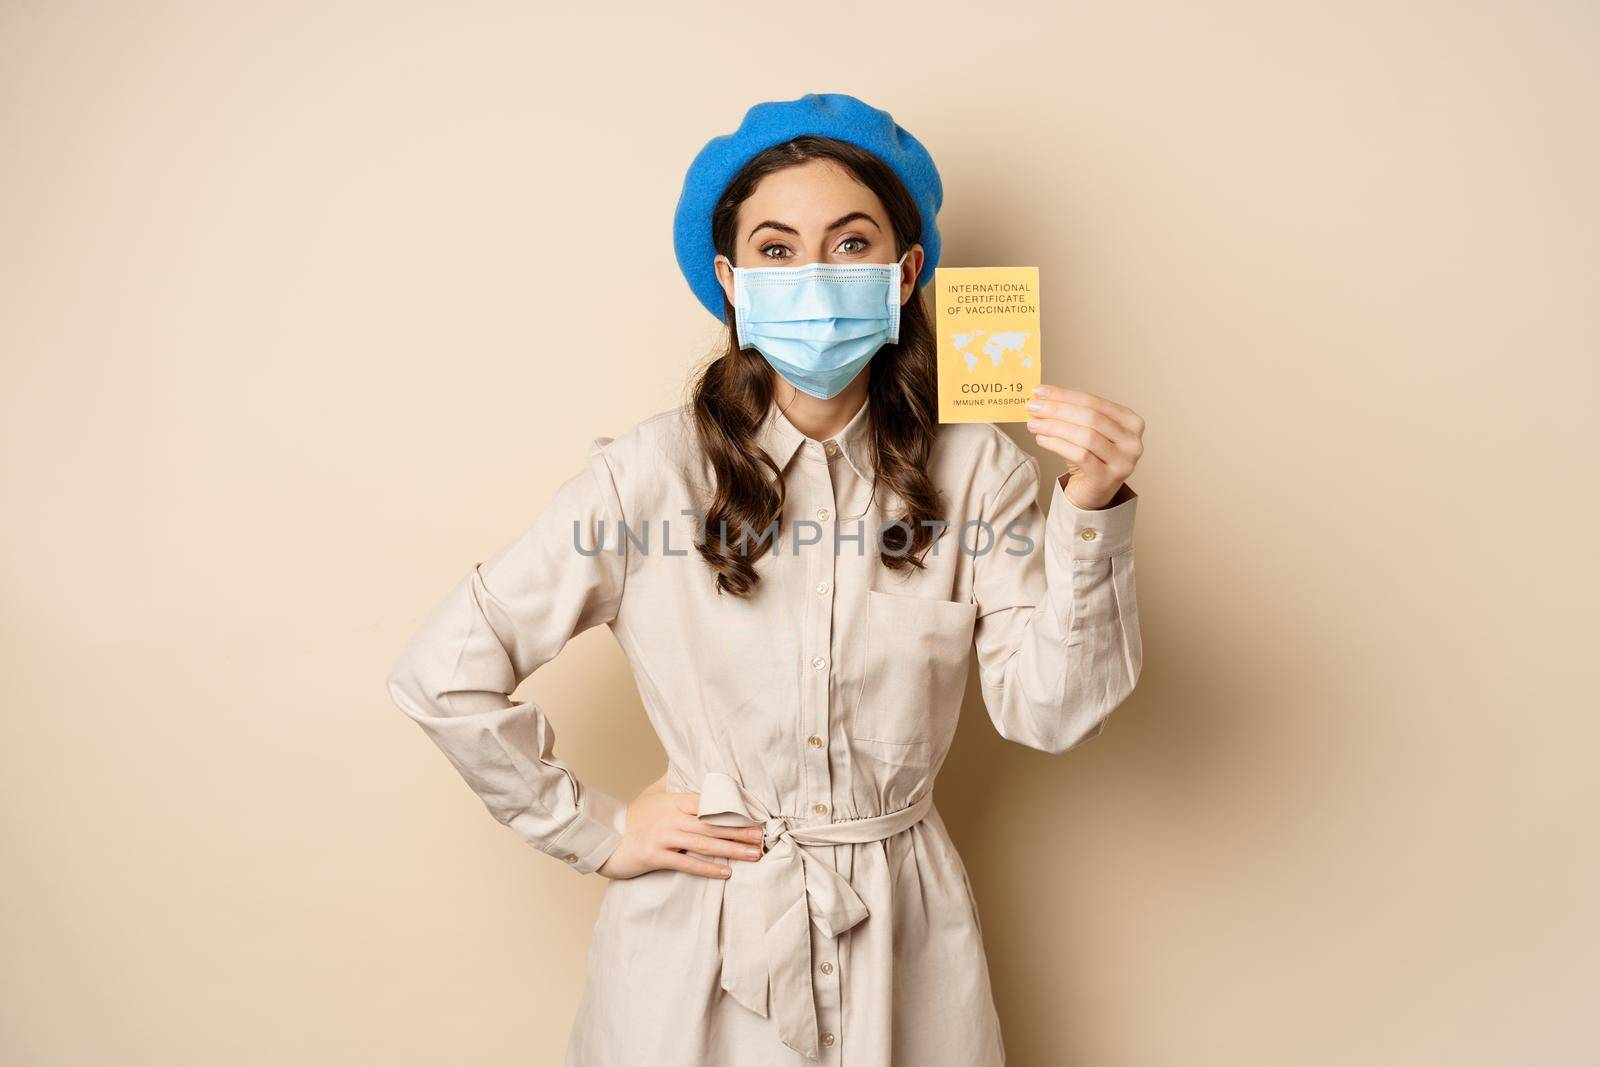 Covid pandemic and travelling concept. Girl tourist in medical face mask, travel vaccinated, showing international vaccination passport during coronavirus outbreak.